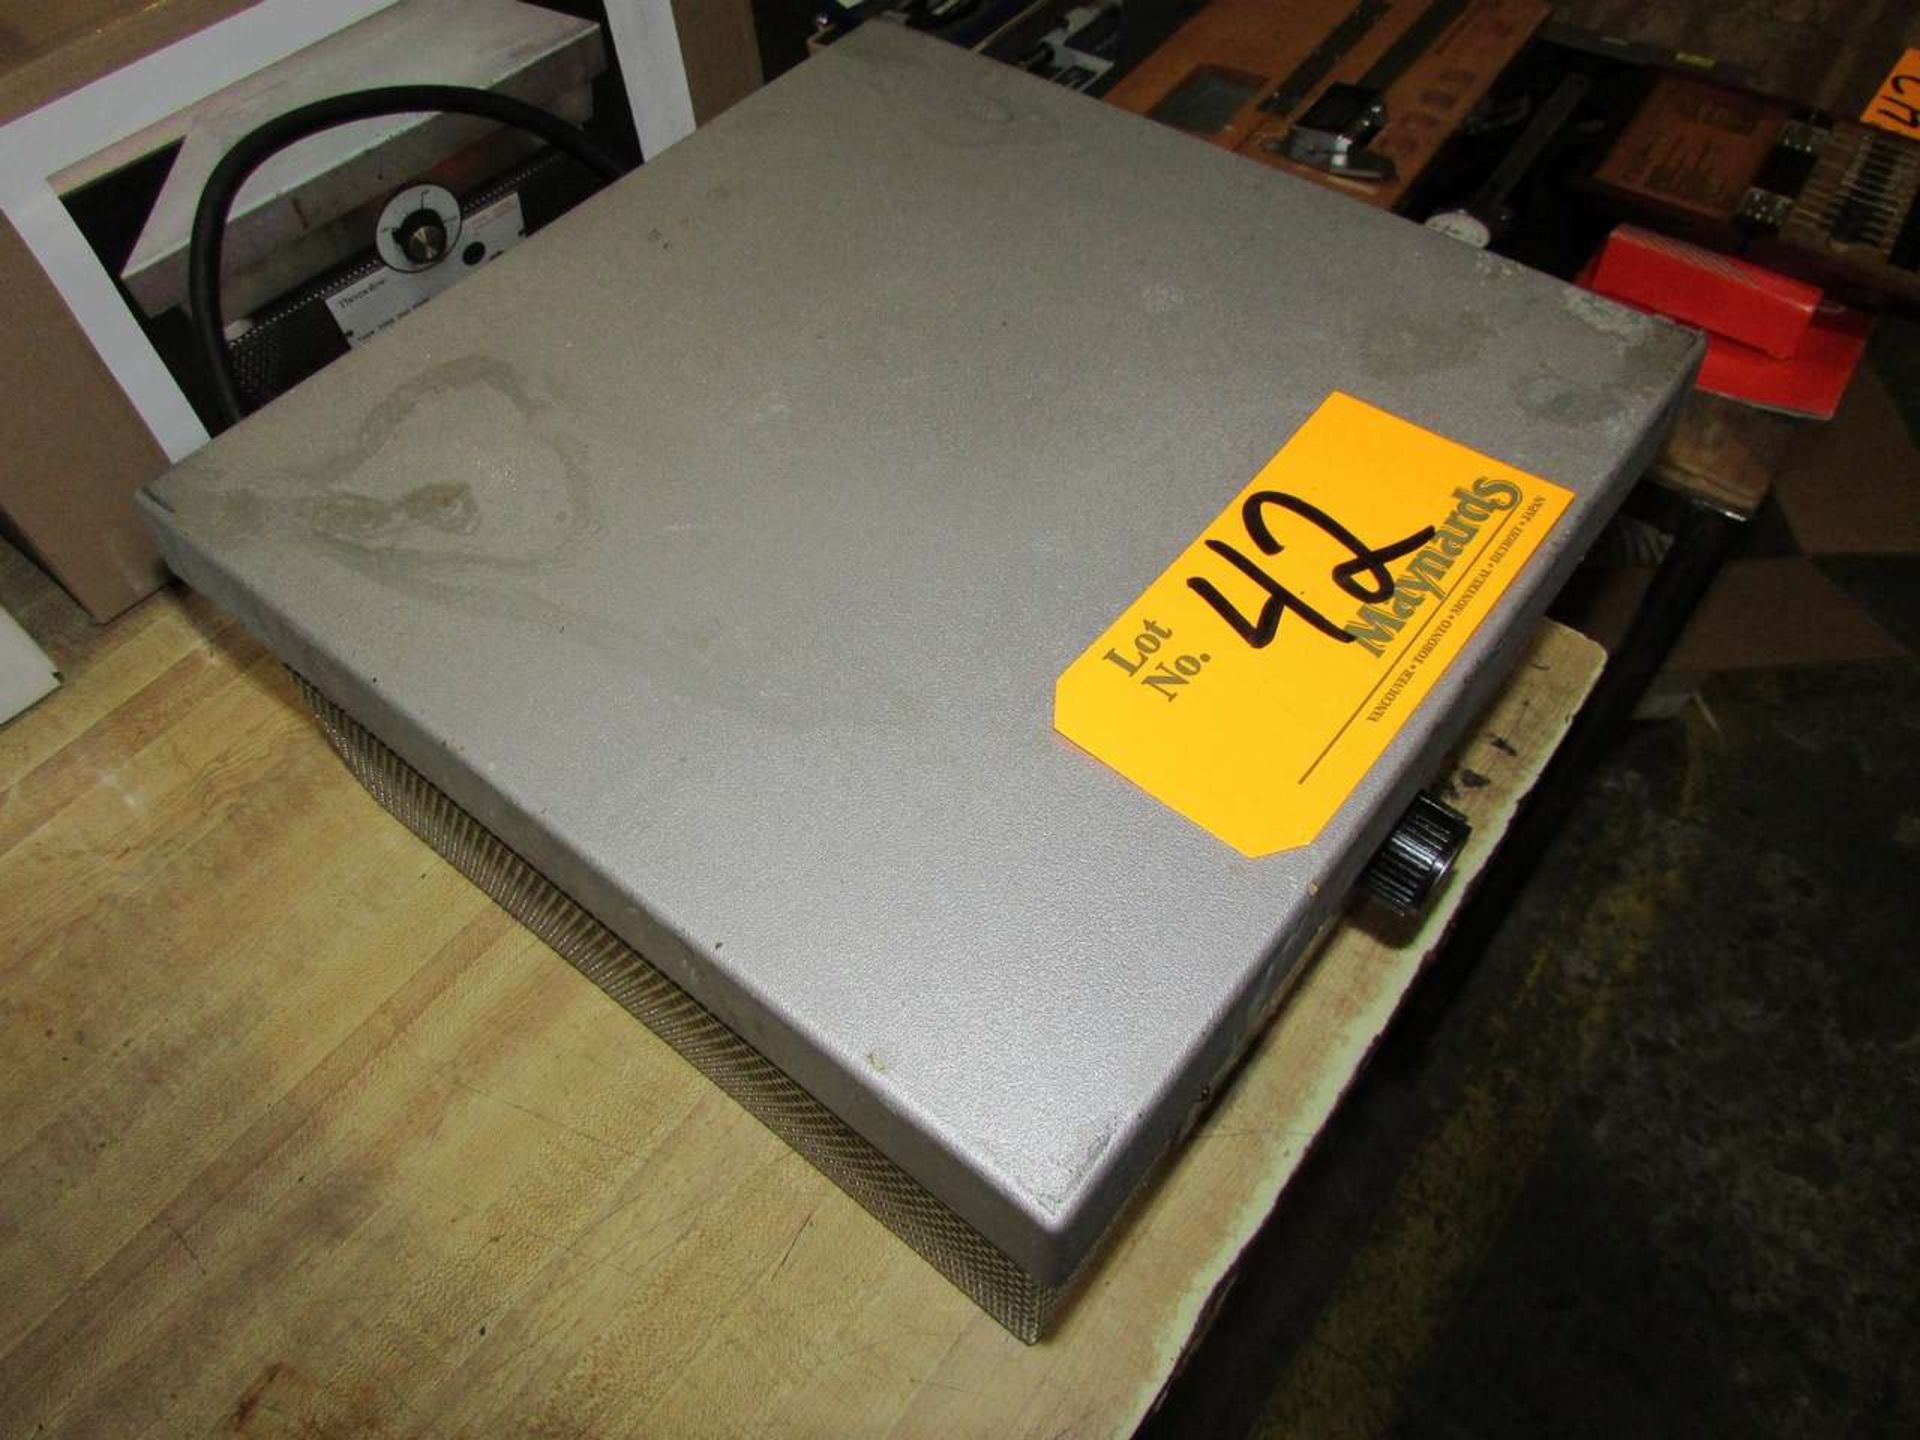 Barnstead/ Thermolyne HPA2235M 12"x12" Hot Plate - Image 3 of 3